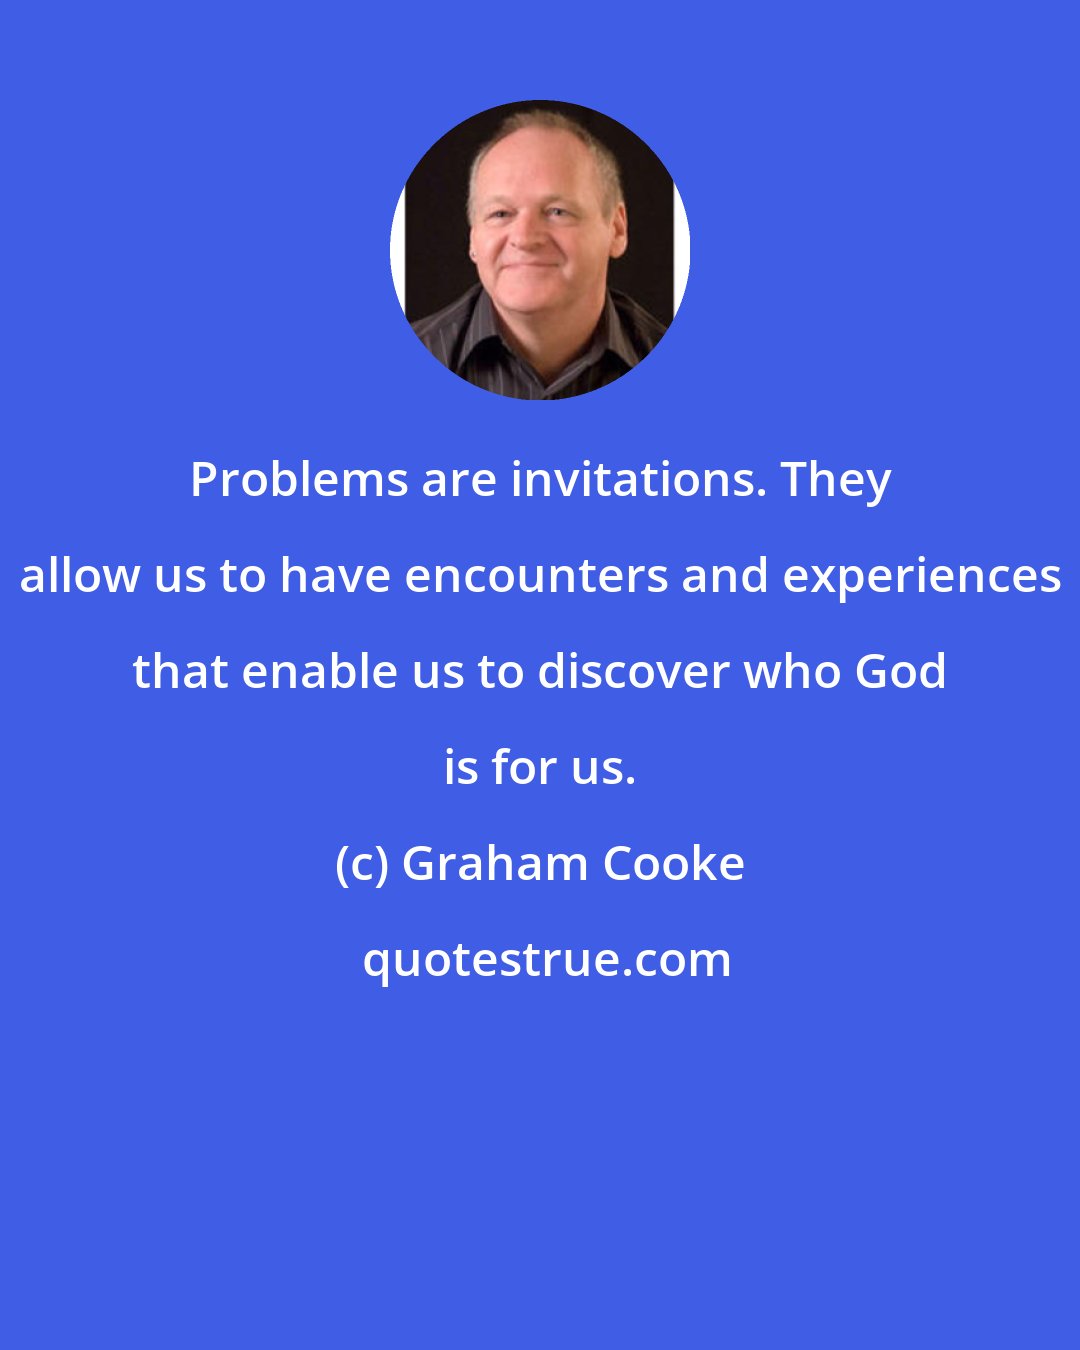 Graham Cooke: Problems are invitations. They allow us to have encounters and experiences that enable us to discover who God is for us.